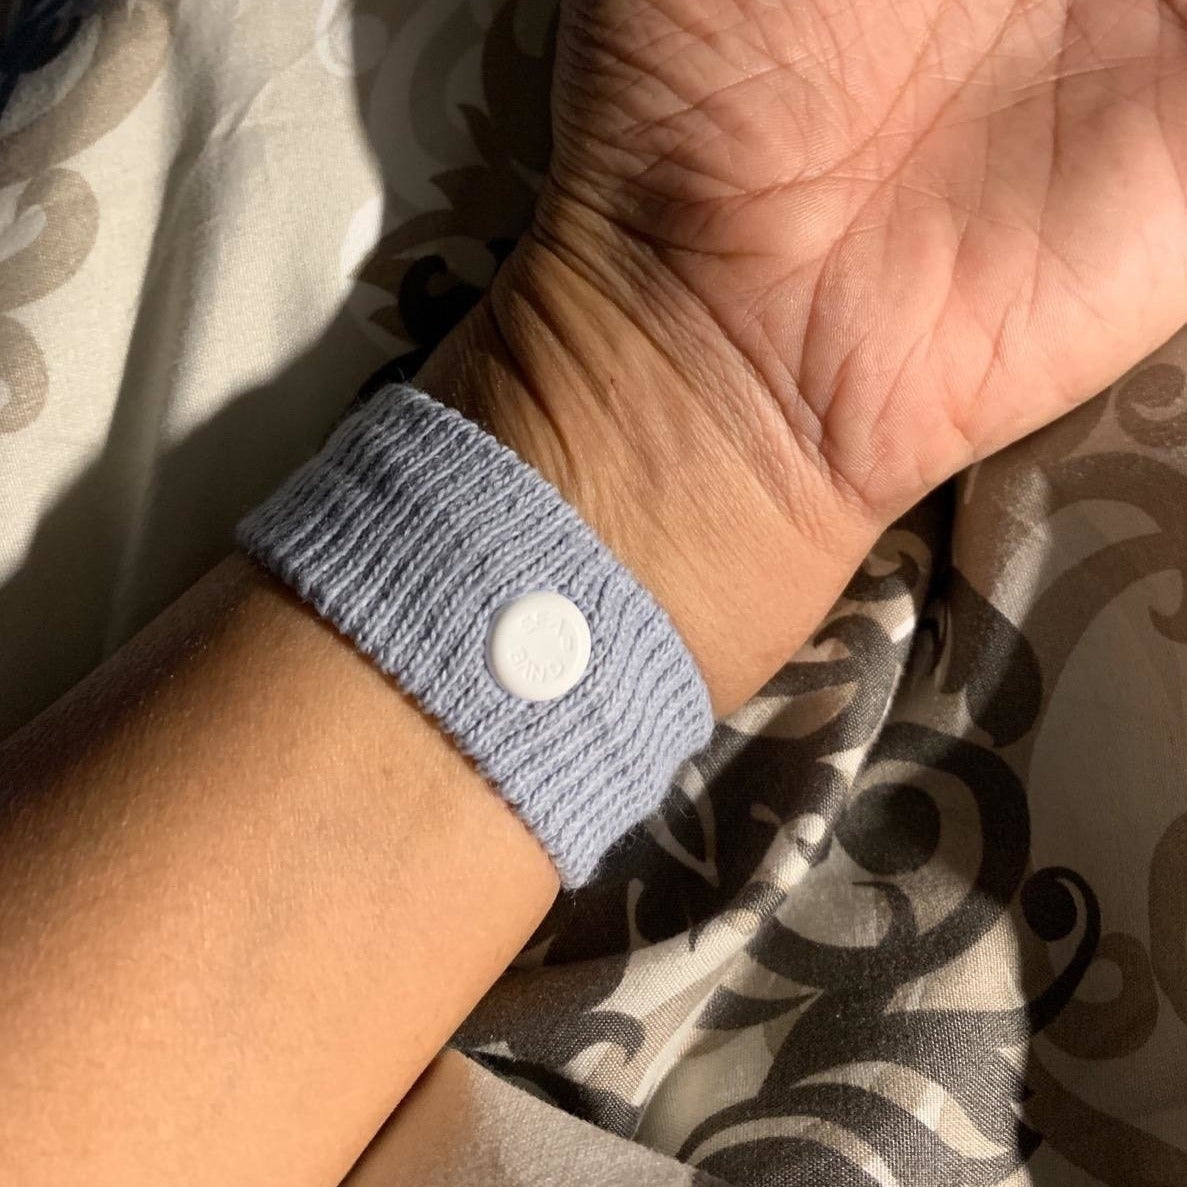 Can Acupressure Wrist Bands Help You Get to Sleep? | The People's Pharmacy